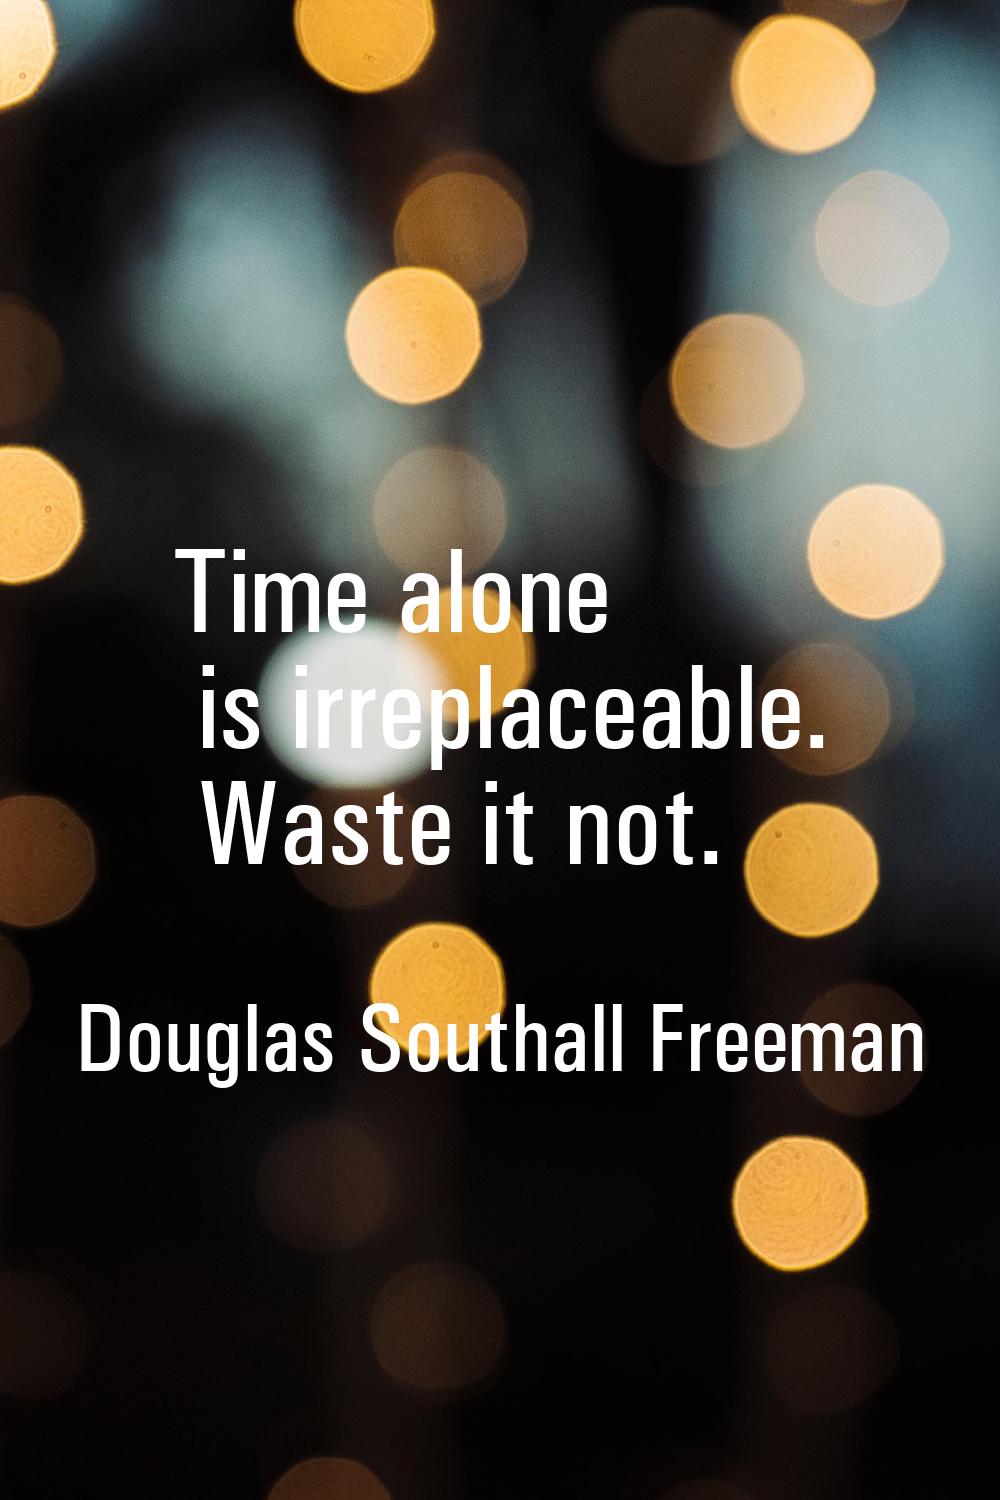 Time alone is irreplaceable. Waste it not.